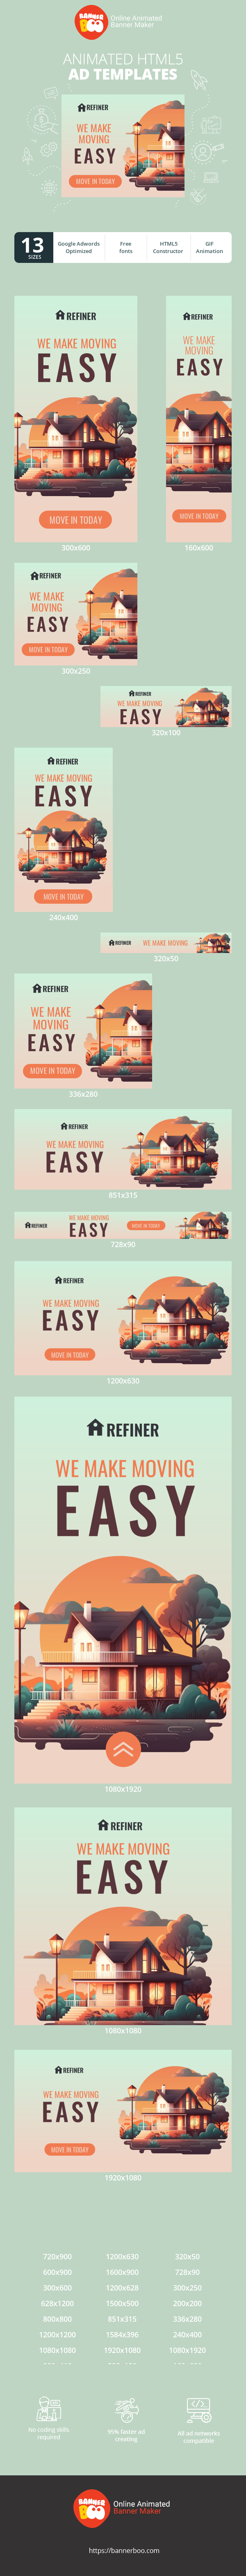 Banner ad template — We Make Moving Easy — Real Estate